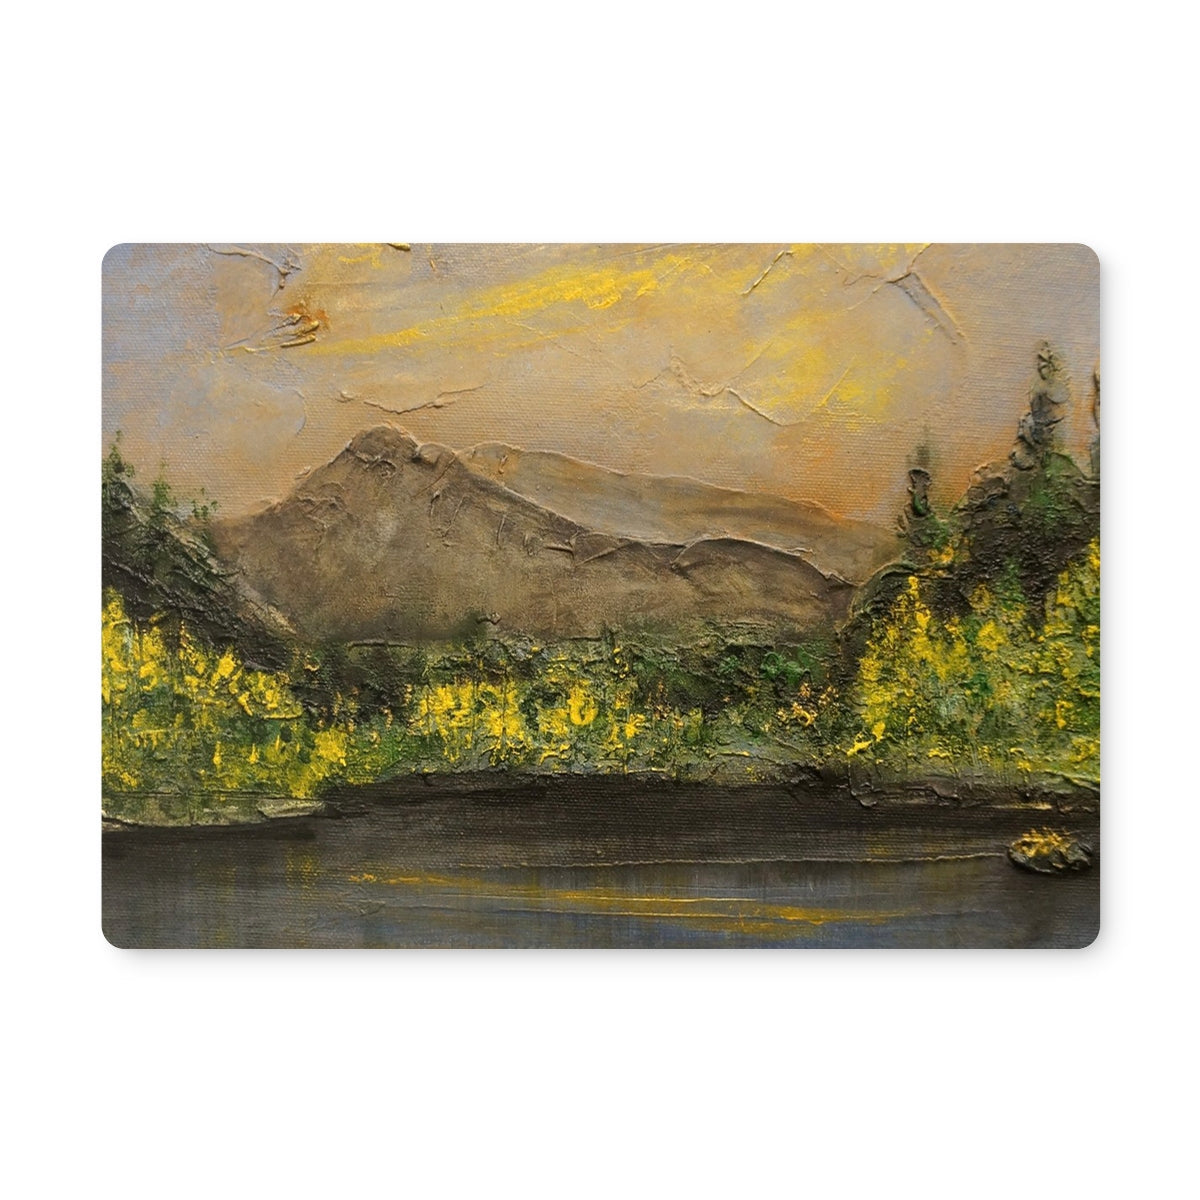 Glencoe Lochan Dusk Art Gifts Placemat-Placemats-Scottish Lochs & Mountains Art Gallery-6 Placemats-Paintings, Prints, Homeware, Art Gifts From Scotland By Scottish Artist Kevin Hunter